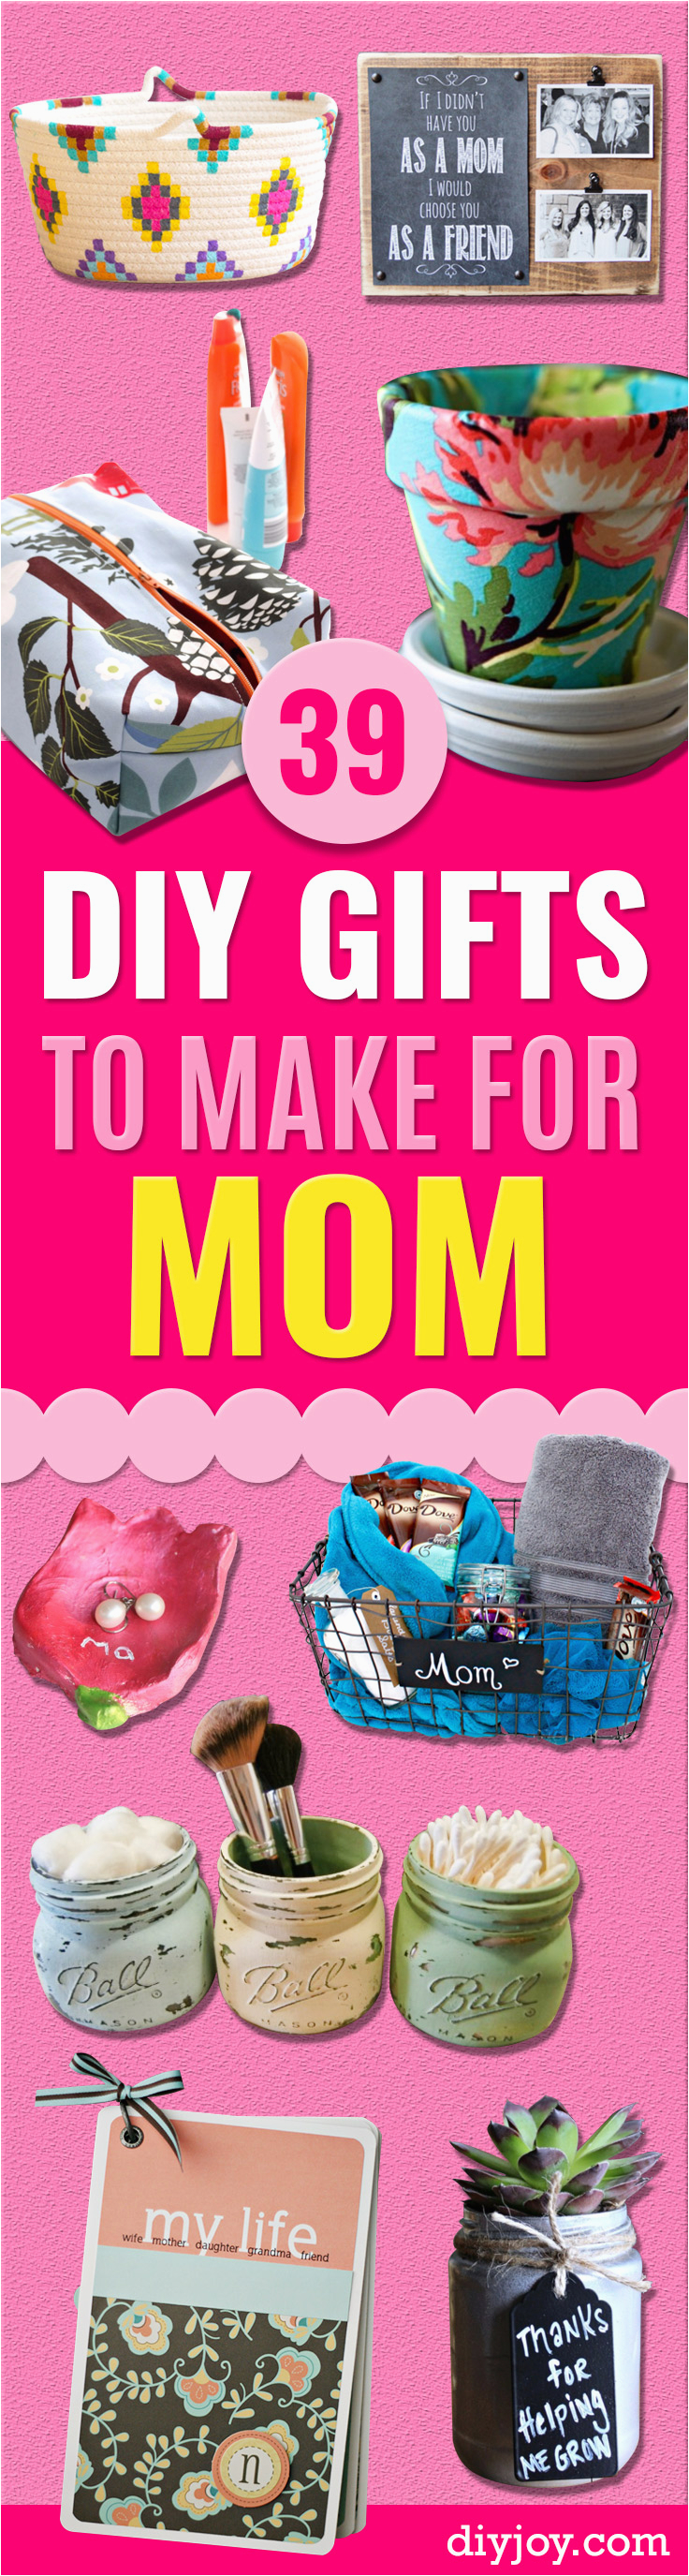 39 creative diy gifts to make for mom